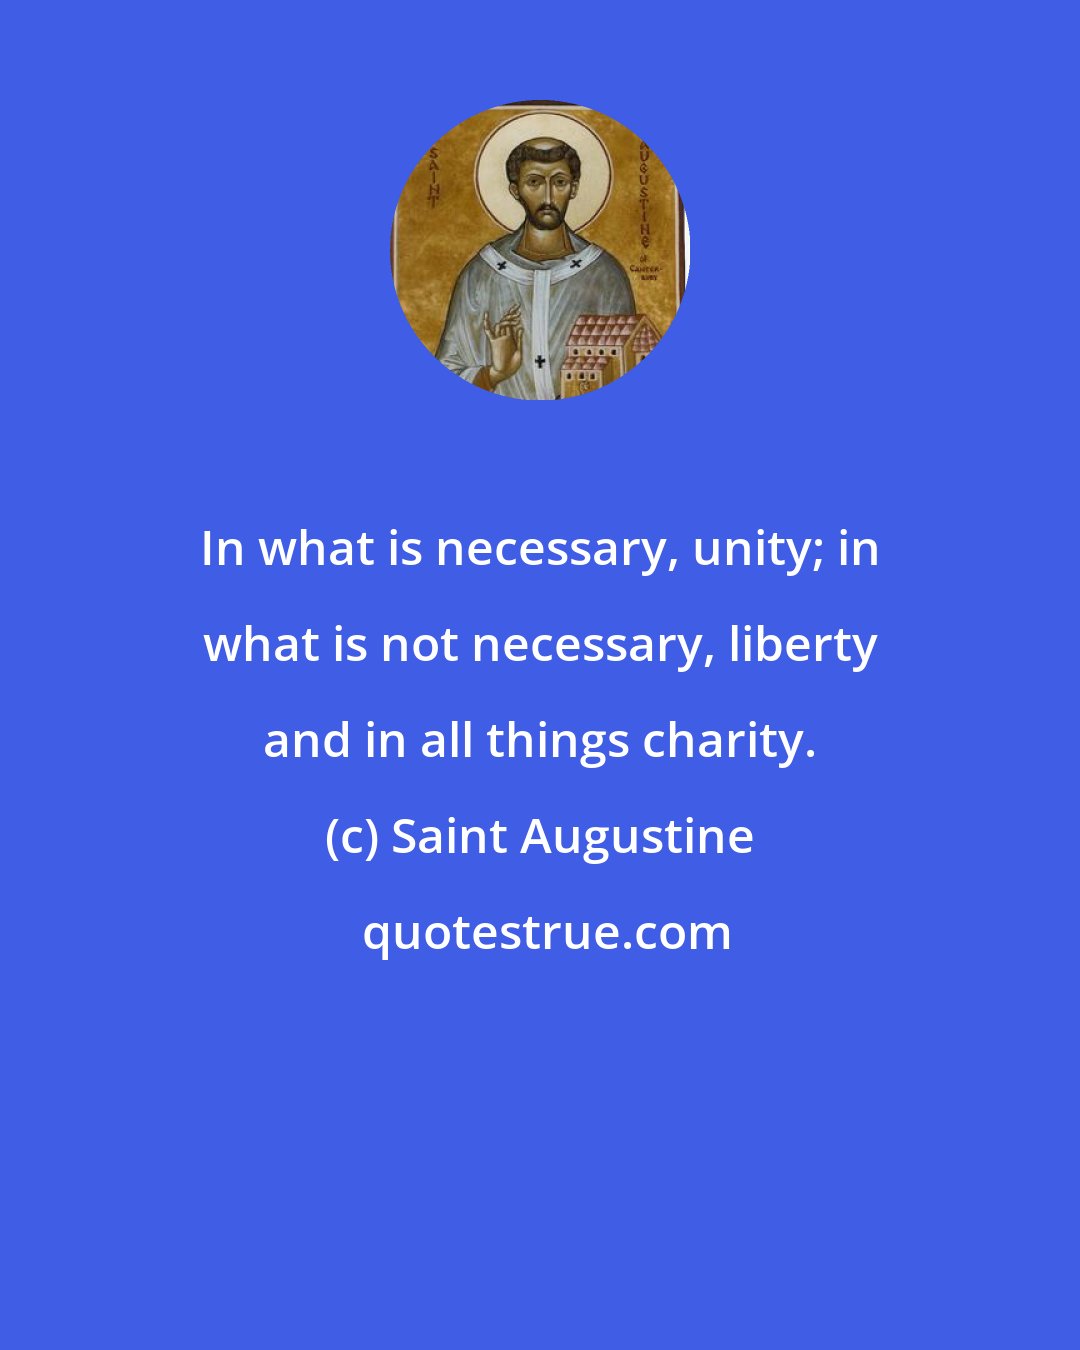 Saint Augustine: In what is necessary, unity; in what is not necessary, liberty and in all things charity.